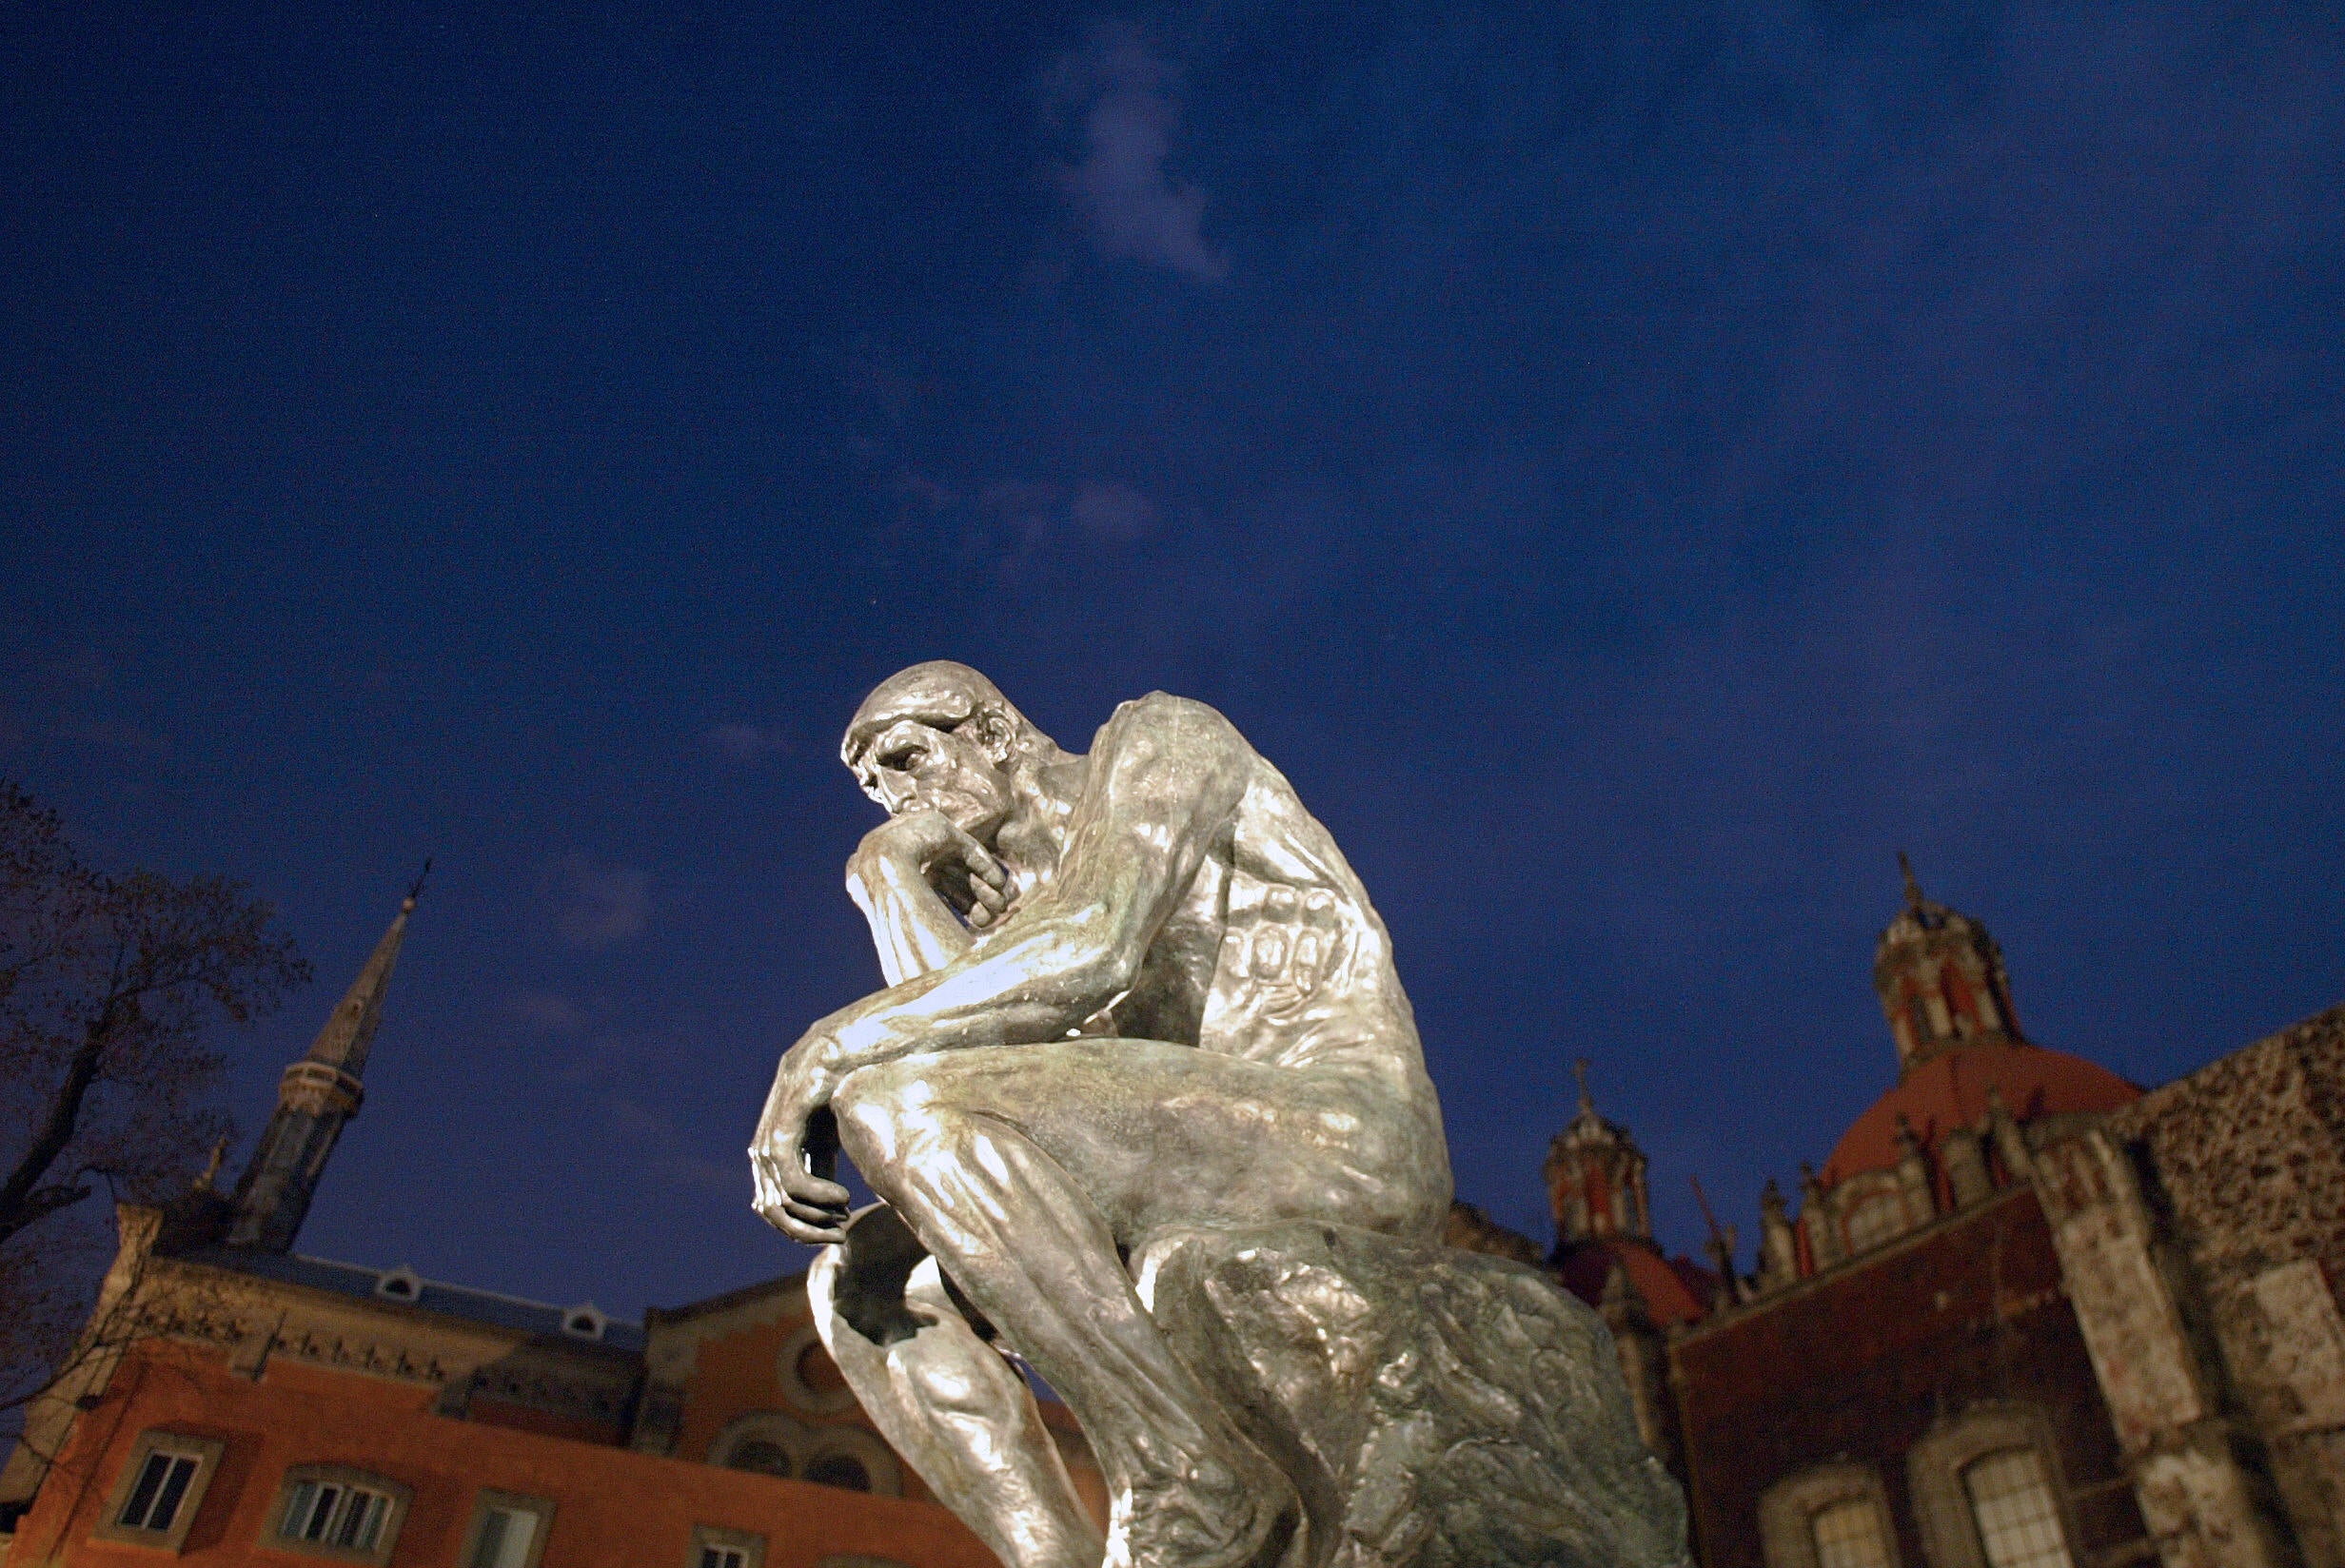 Don't think too hard: the sculpture 'The Thinker' by French artist Auguste Rodin.